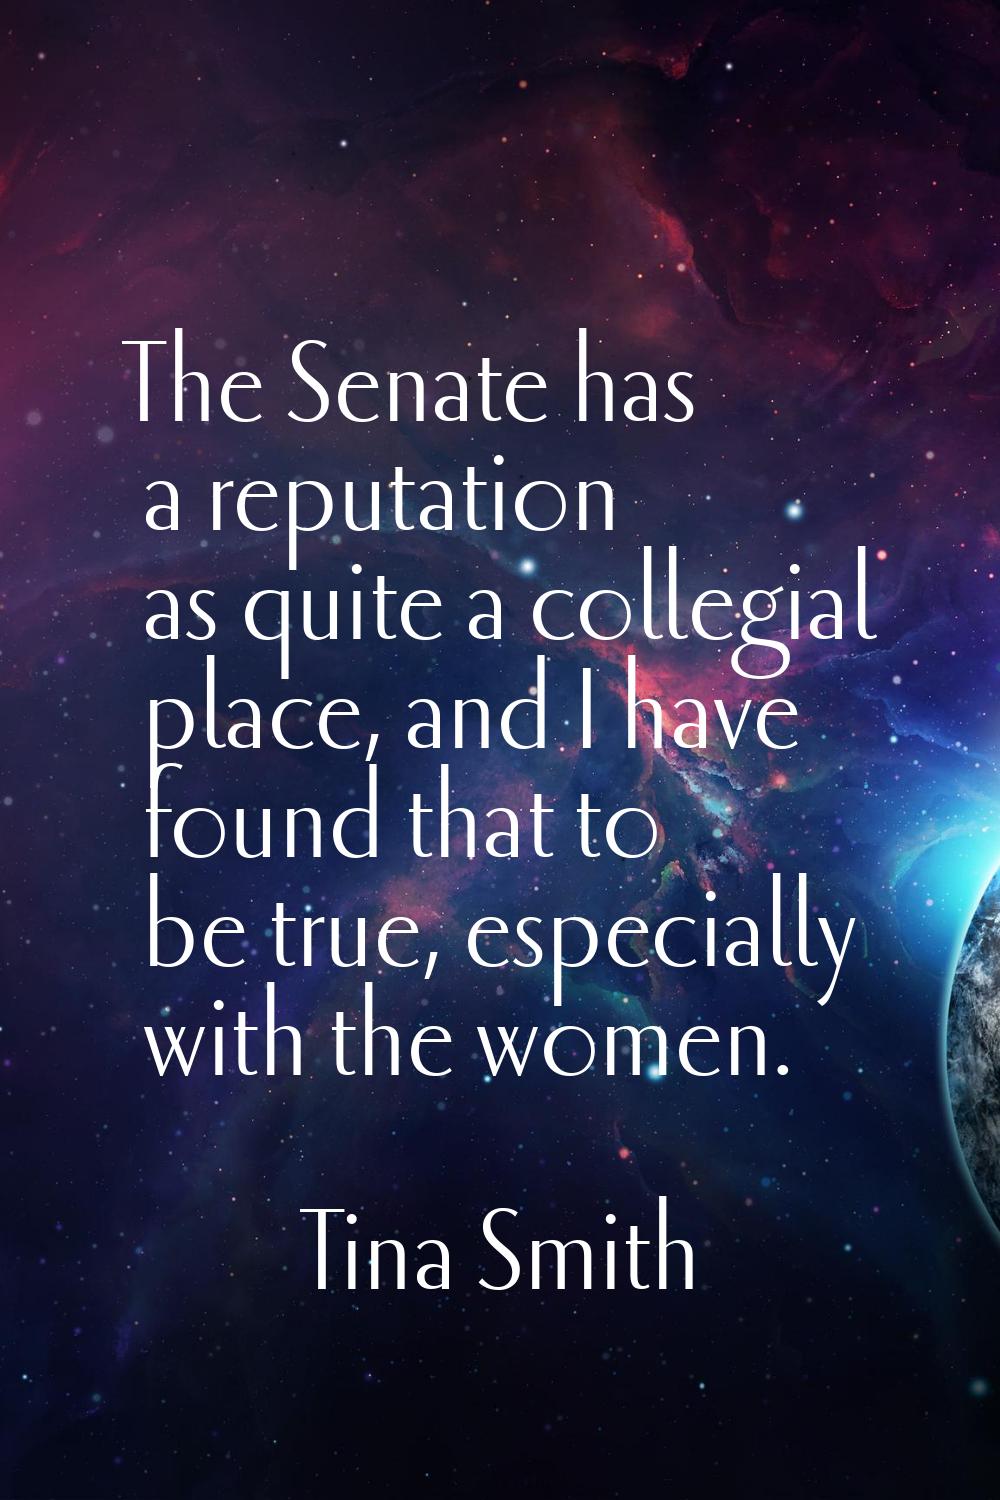 The Senate has a reputation as quite a collegial place, and I have found that to be true, especiall